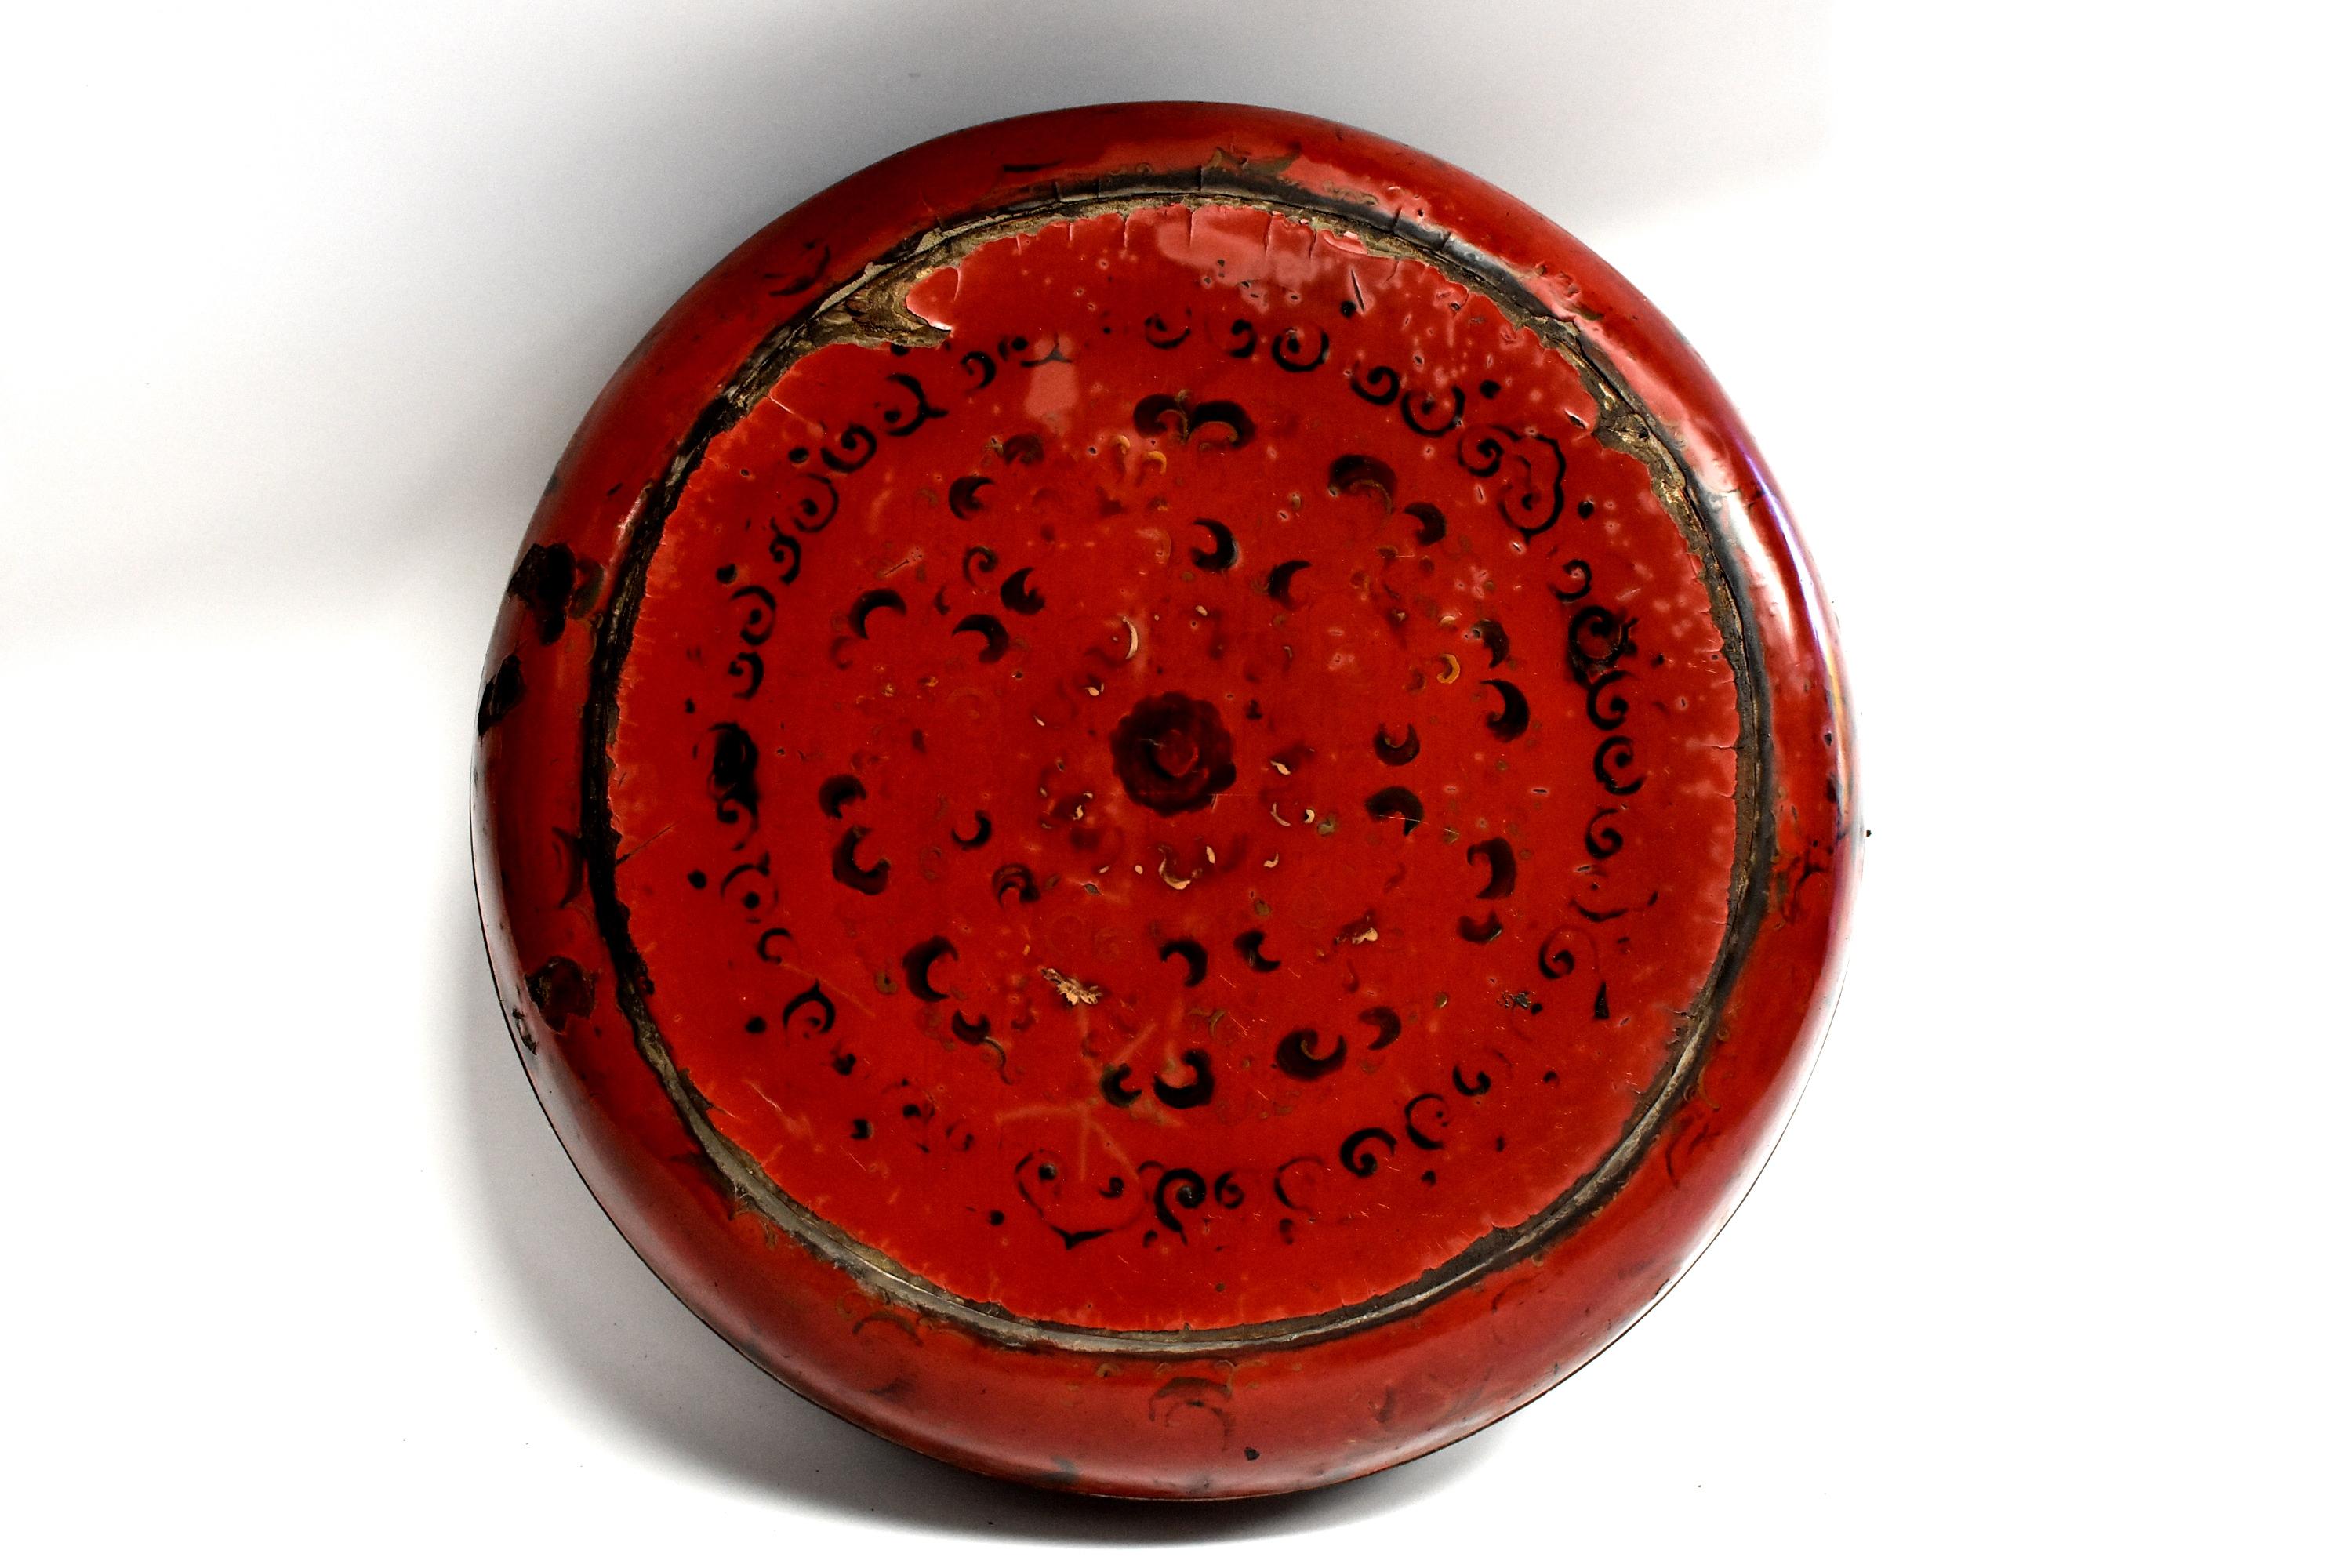 A beautiful ancient red lacquered round box with original paintings. The remnants of the top's elaborate painting of flowers and scrolls remain visible. Box has a black lacquered interior. Areas of wear show many layers of construction. All